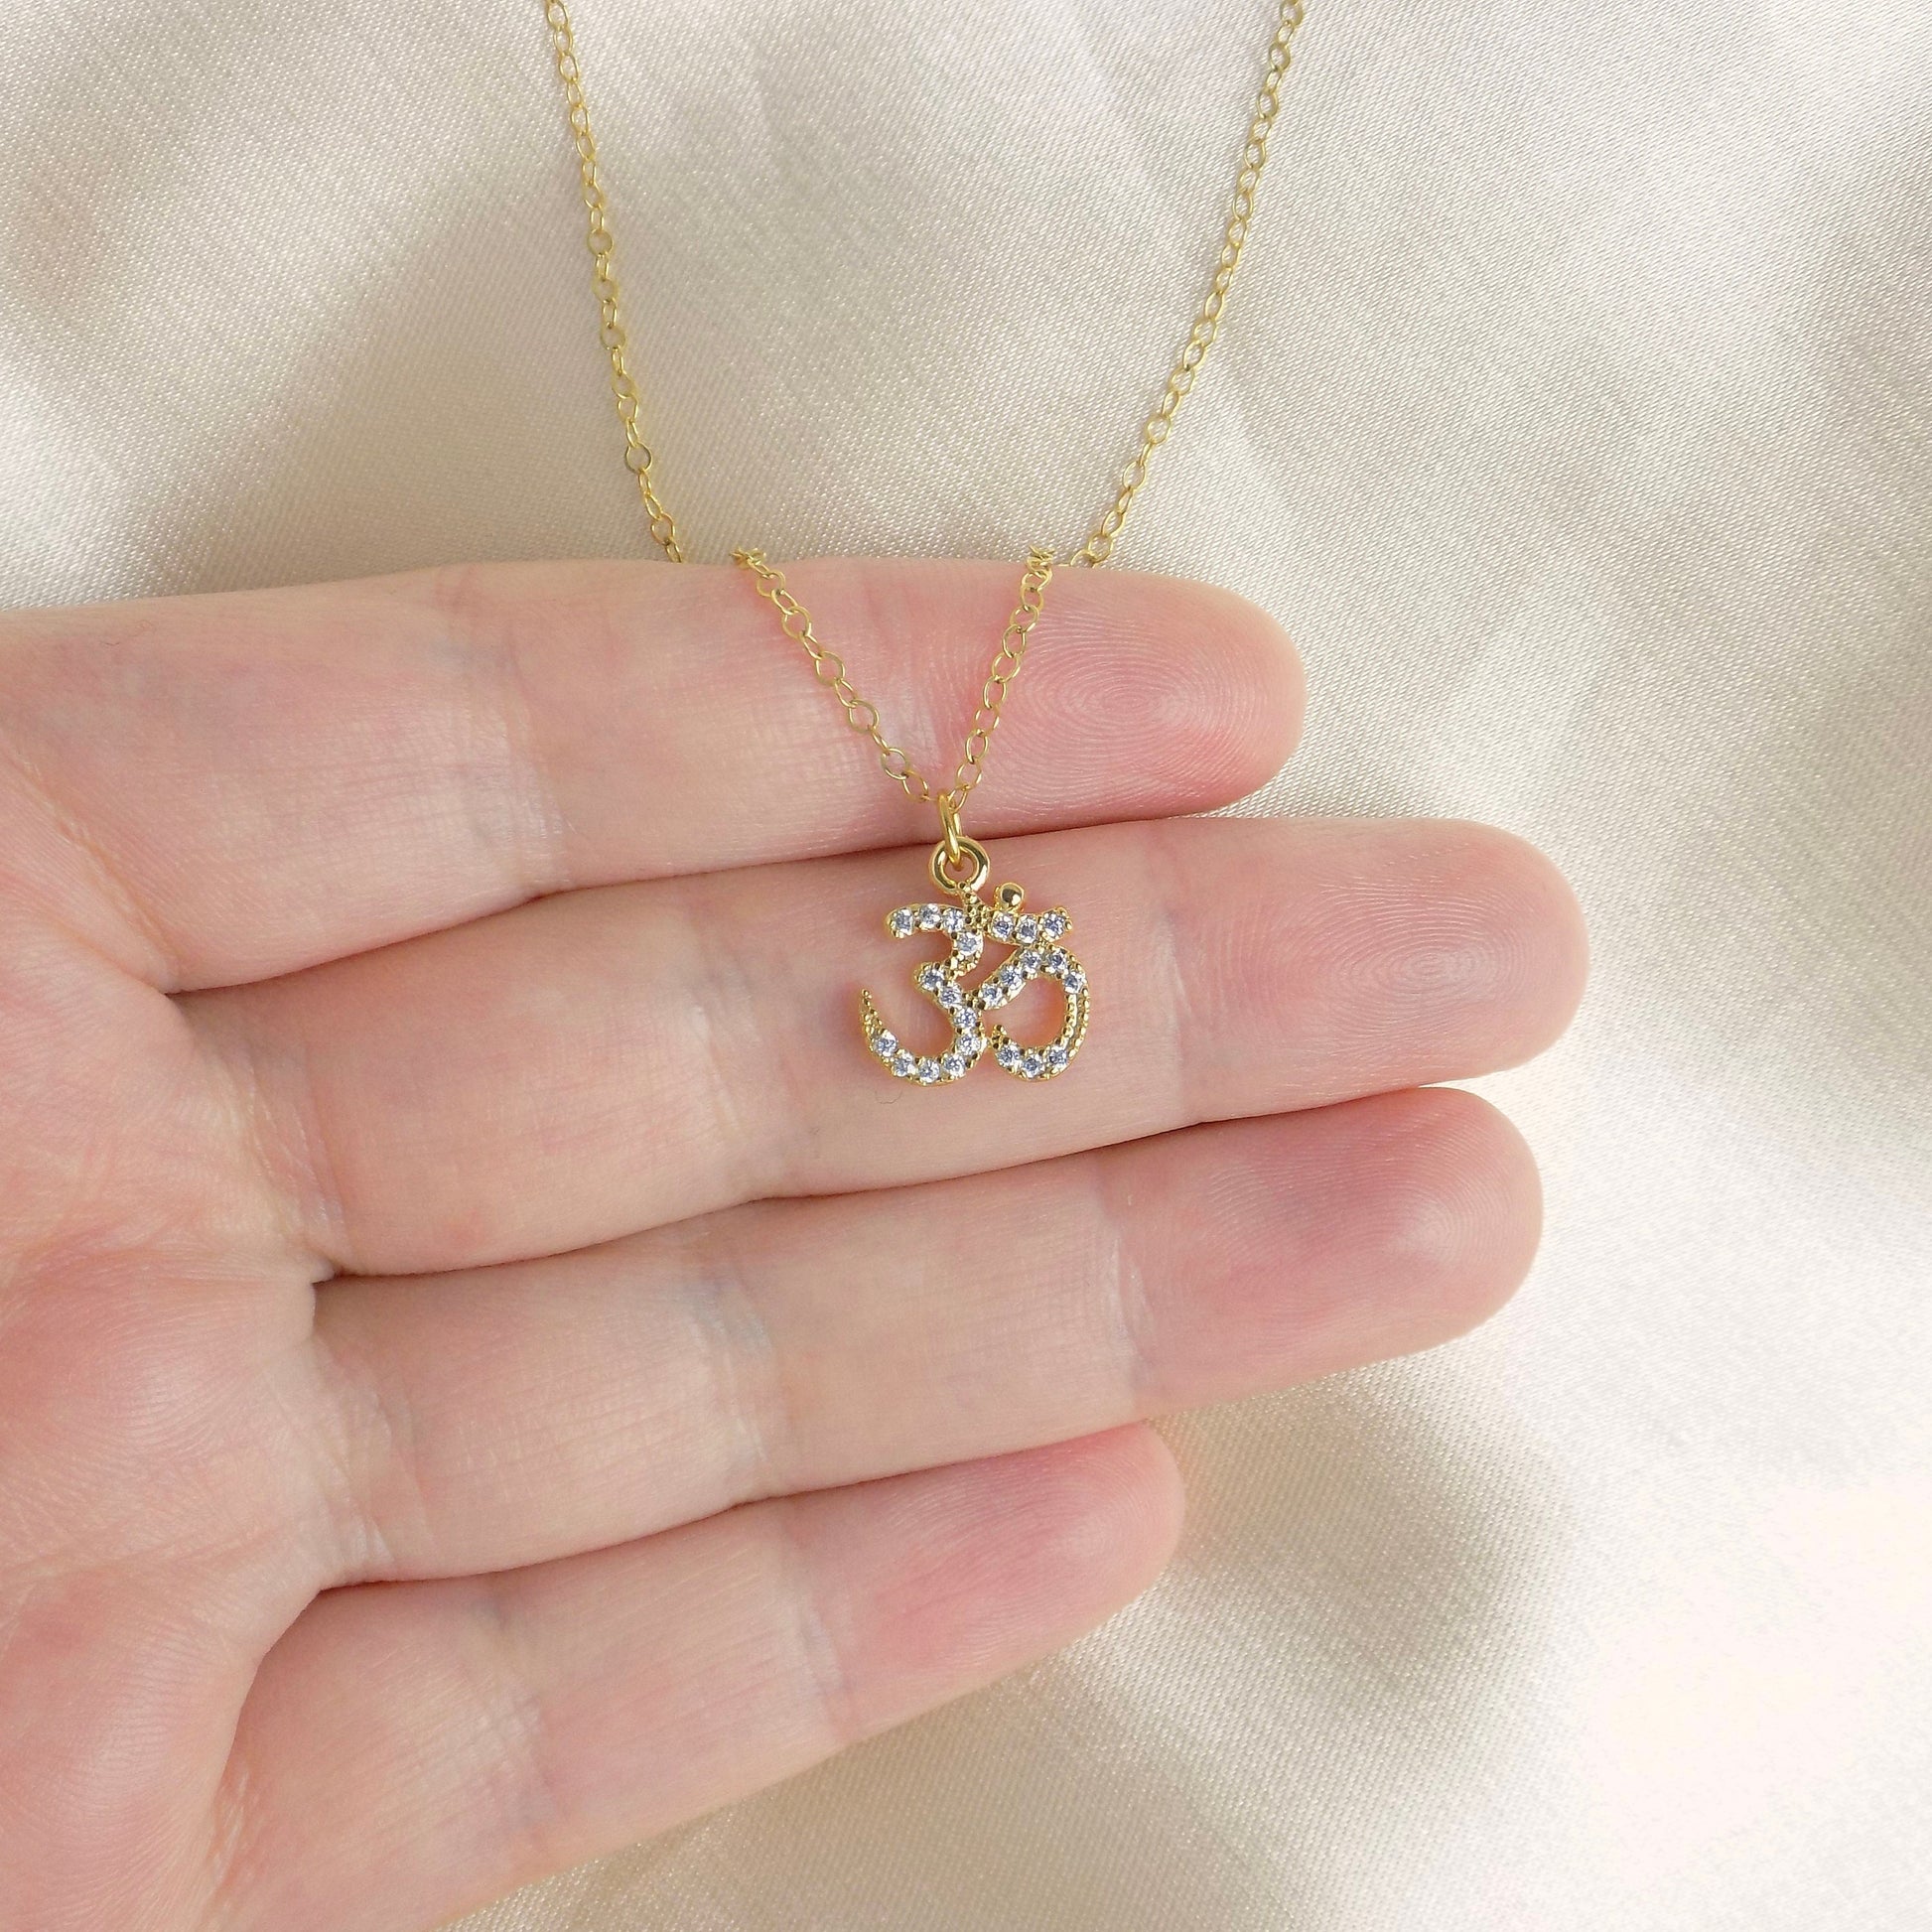 Gift Women, Gold Ohm Om Minimalist Necklace Zircon, Delicate Charm Necklace Layering, M5-611